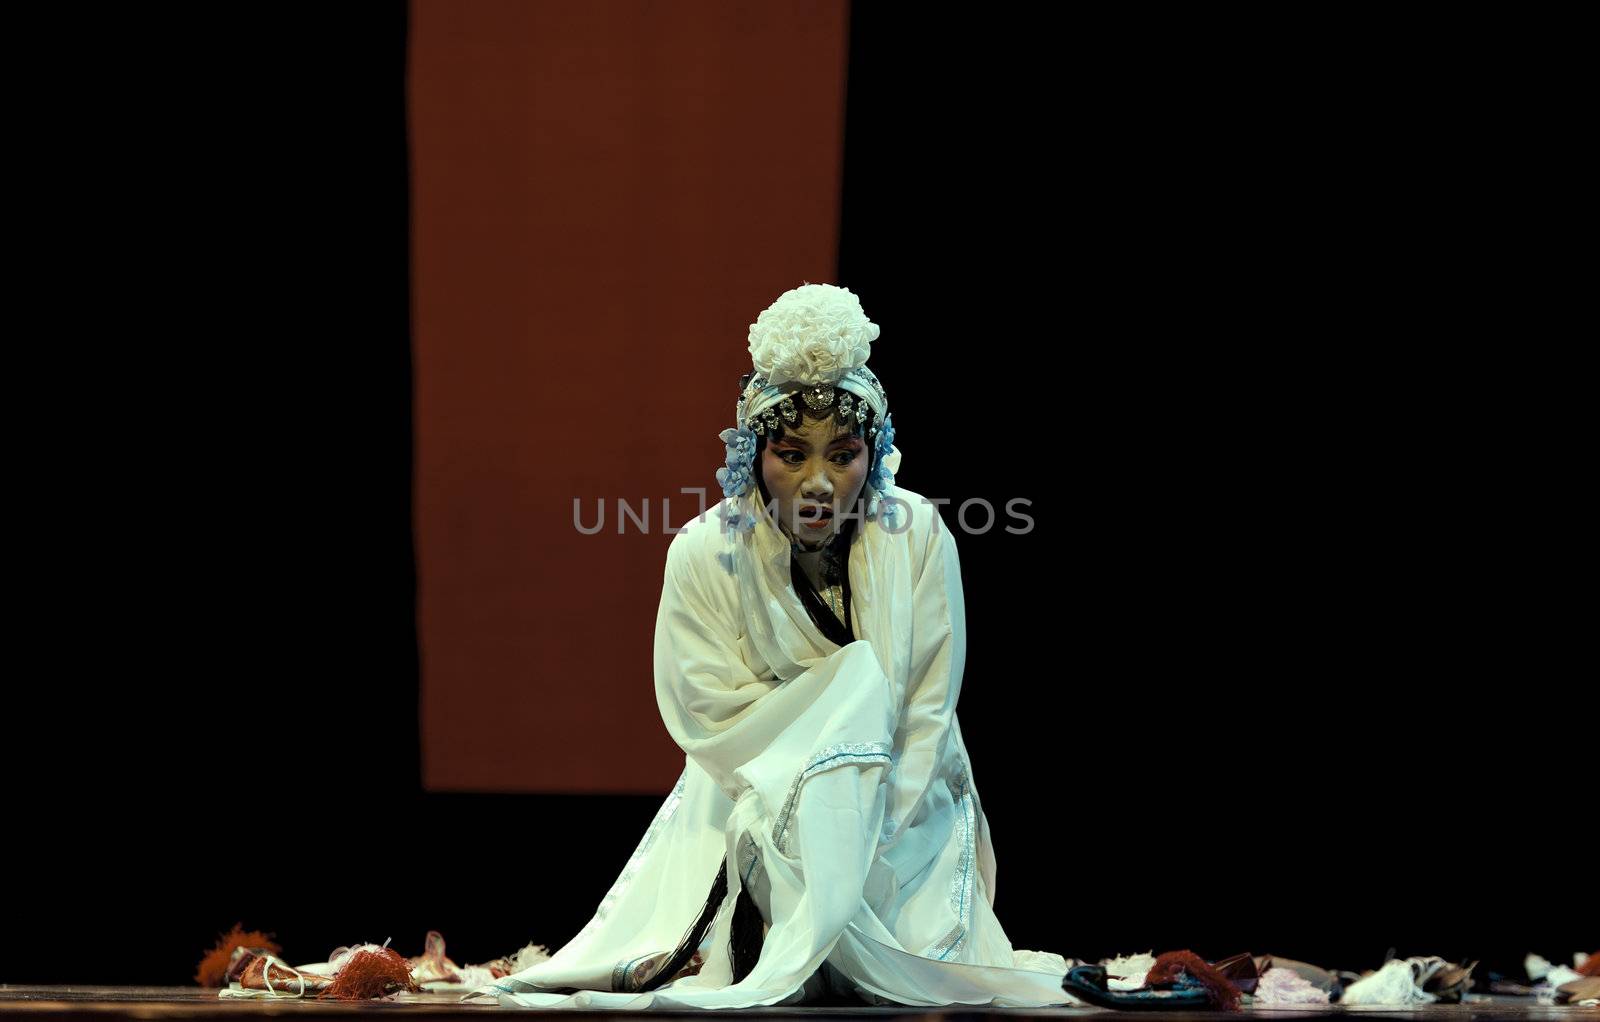 CHENGDU - SEPT 29: chinese famous opera artist Tian Mansha performs Concept opera Sigh on stage at JinSha theater Sept 29, 2011 in Chengdu, China.